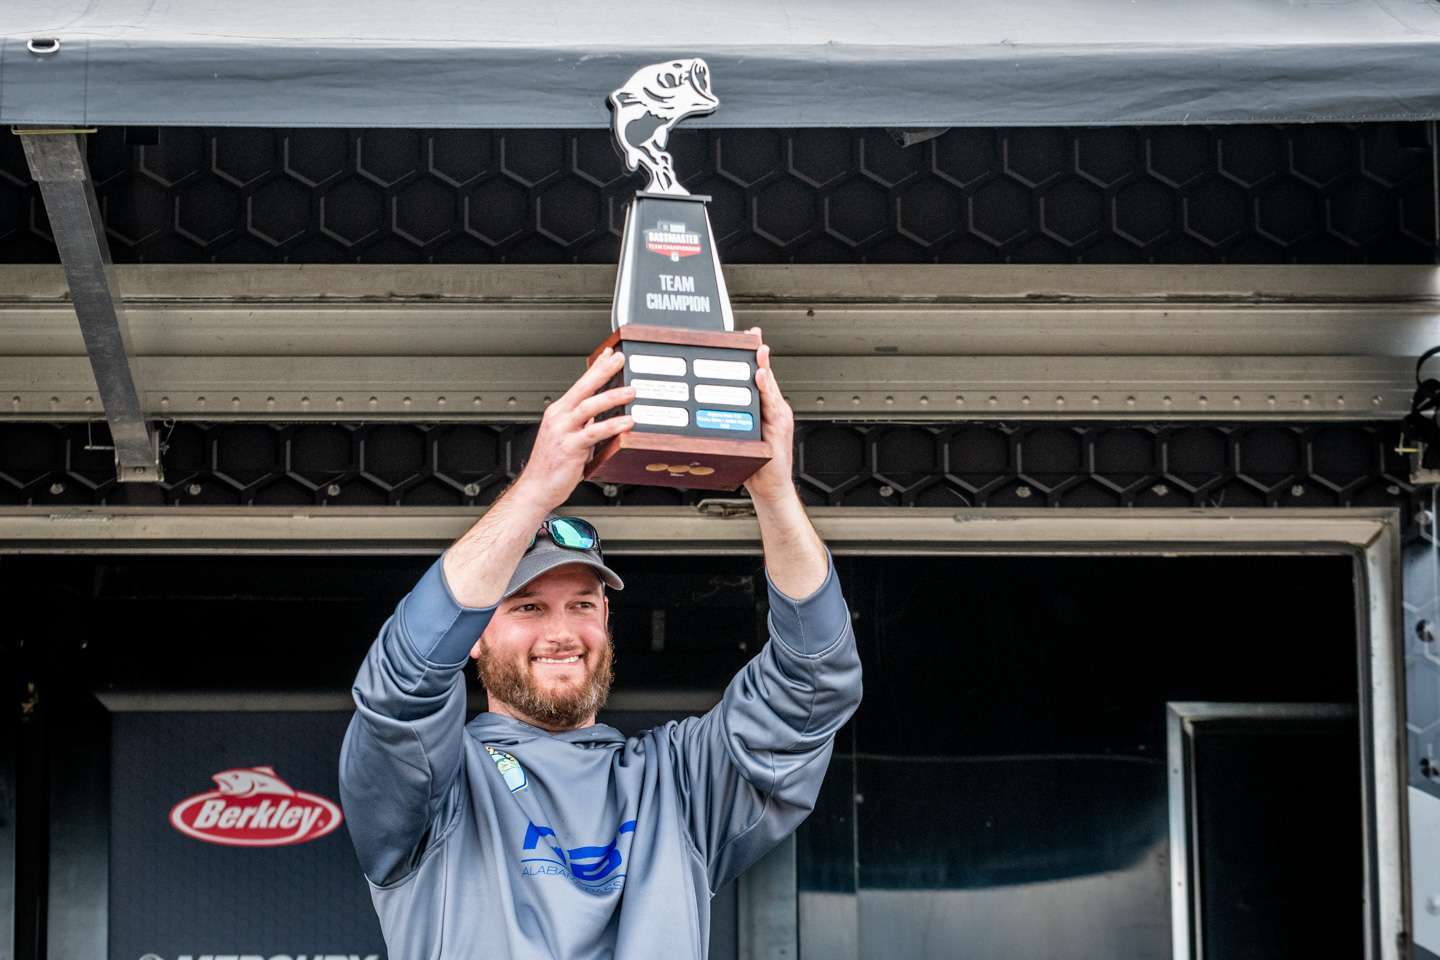 <b>Shane Powell</b><br />
Qualified via the 2021 Bassmaster Team Championship” class=”wp-image-567998″ width=”1440″ height=”960″/><figcaption><b>Shane Powell</b><br />
Qualified via the 2021 Bassmaster Team Championship</figcaption></figure>
	</div><!-- .entry-content -->

	<footer class=